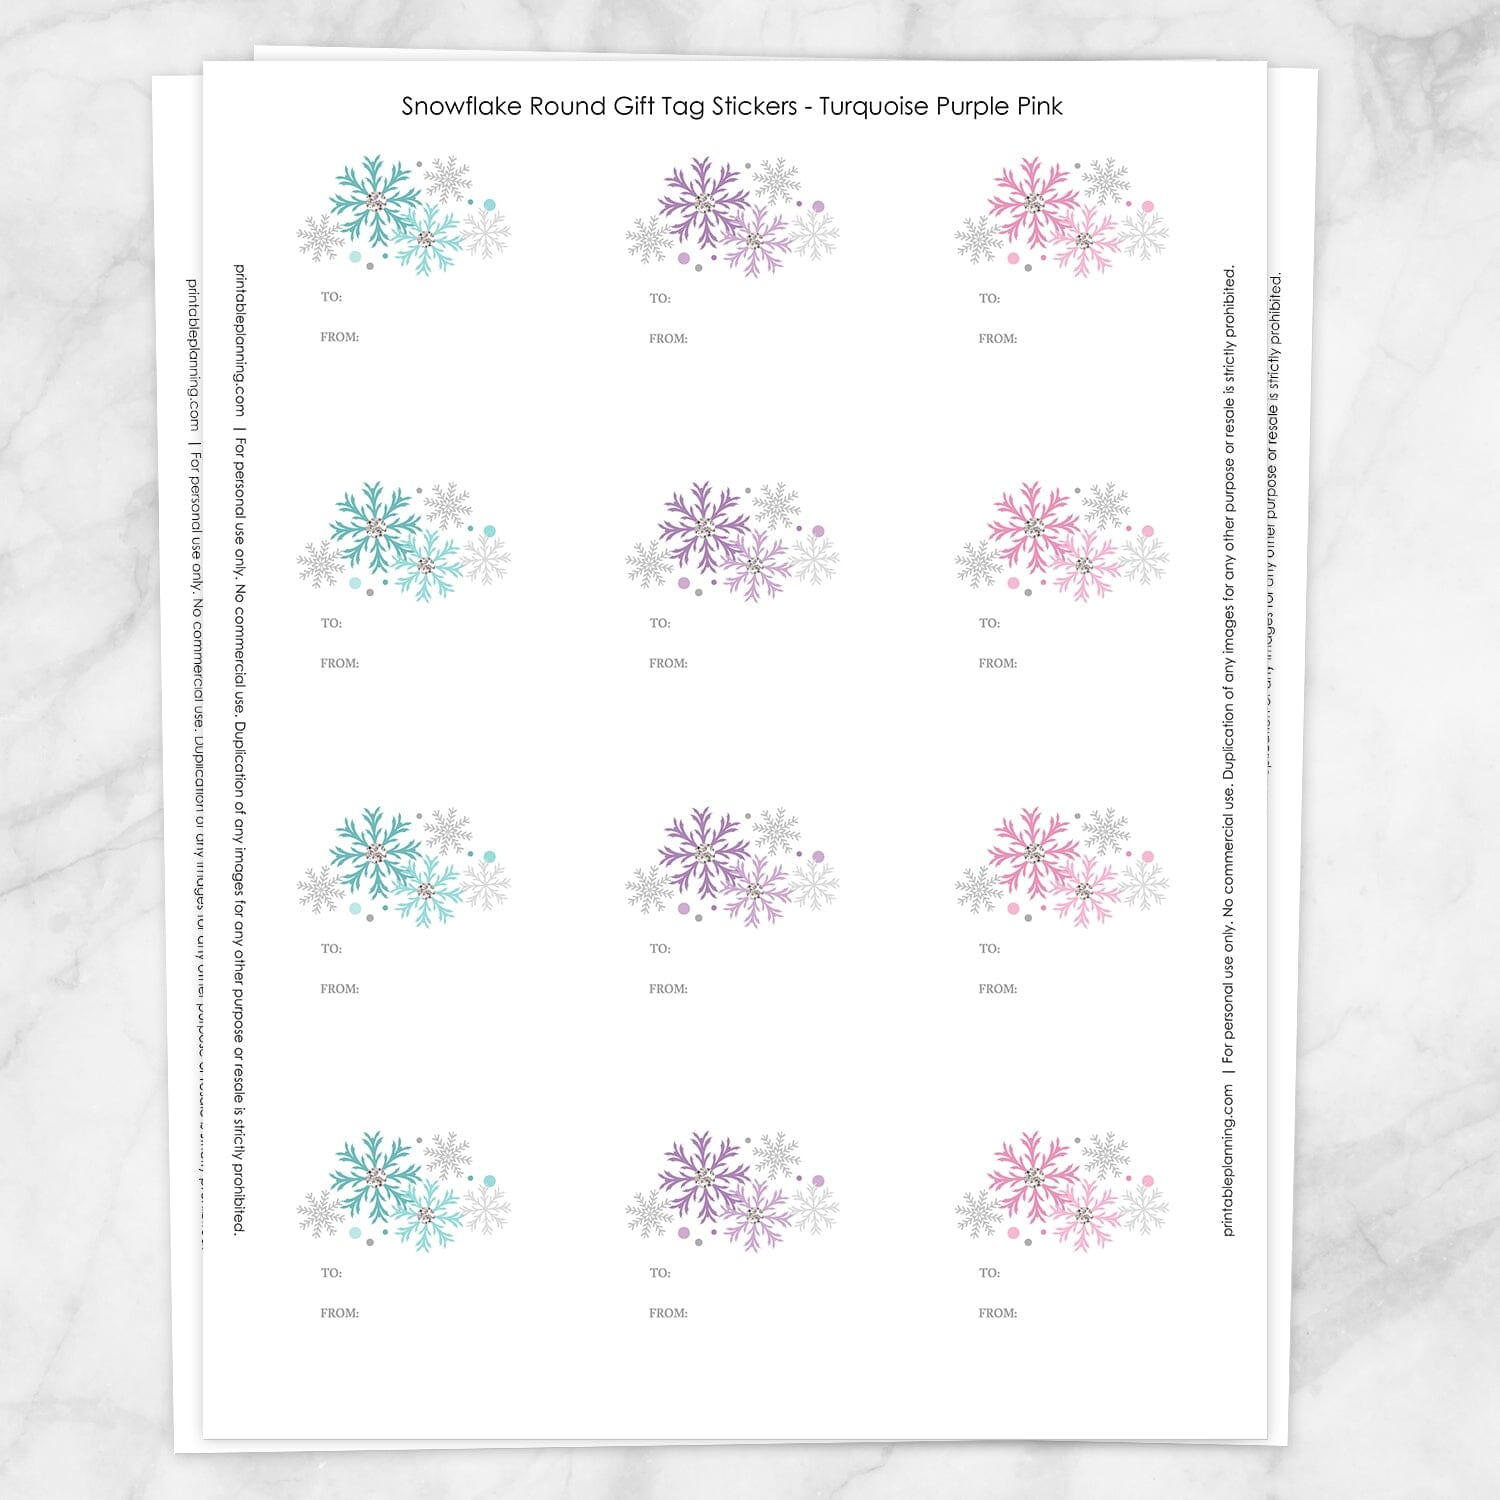 Printable Snowflake Gift Tag Stickers - Turquoise Purple Pink at Printable Planning. Sheet of 12 stickers.